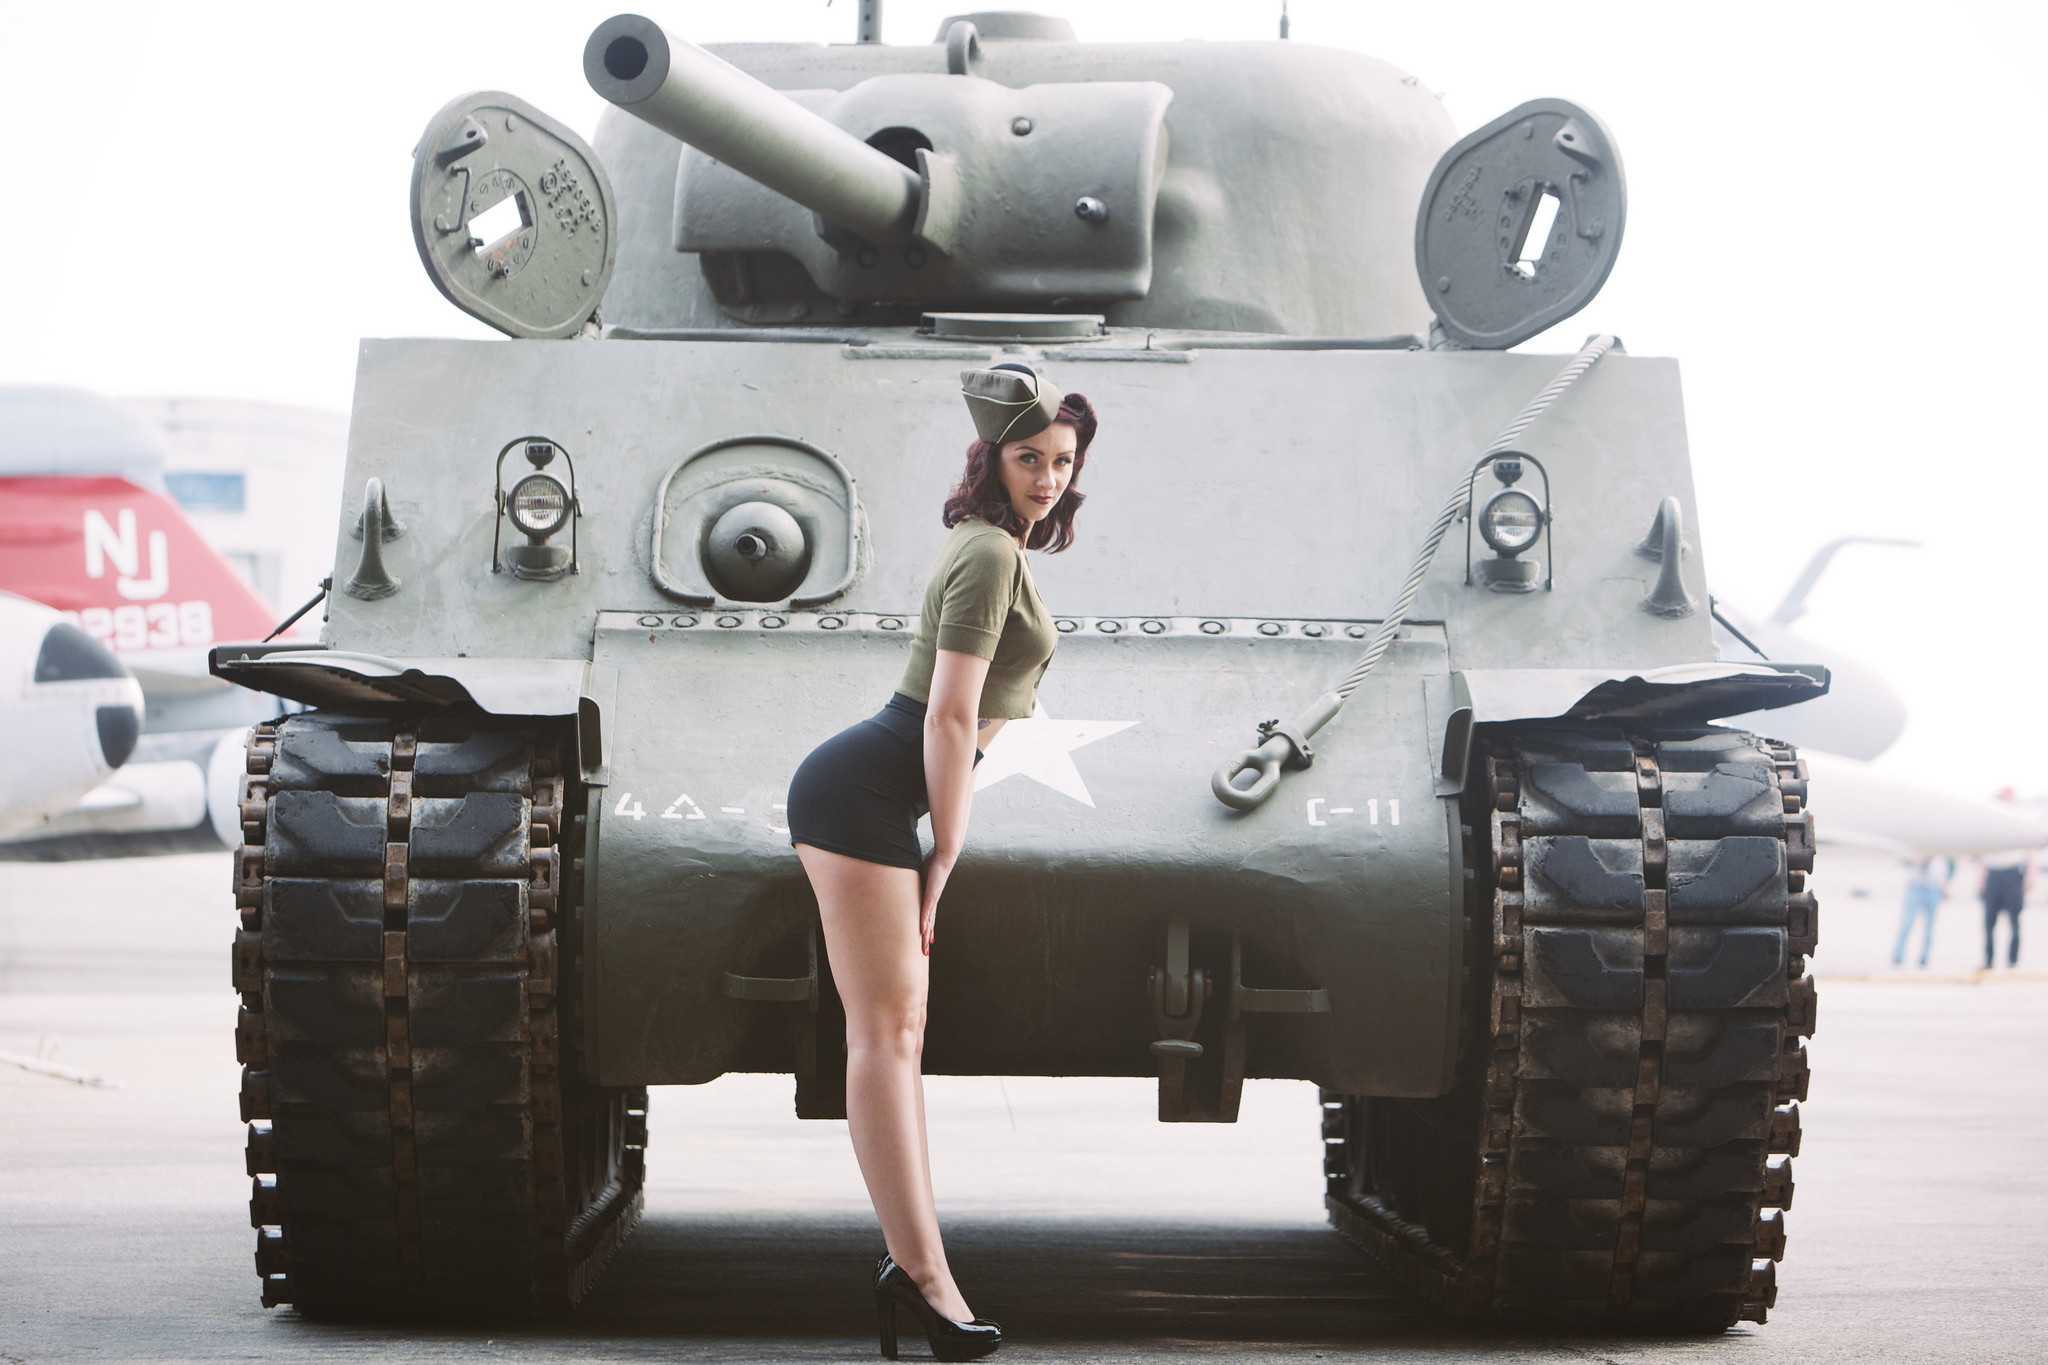 2048x1365 Looking forLooking for wallpapers in this similar style. WW2 Pinup ...